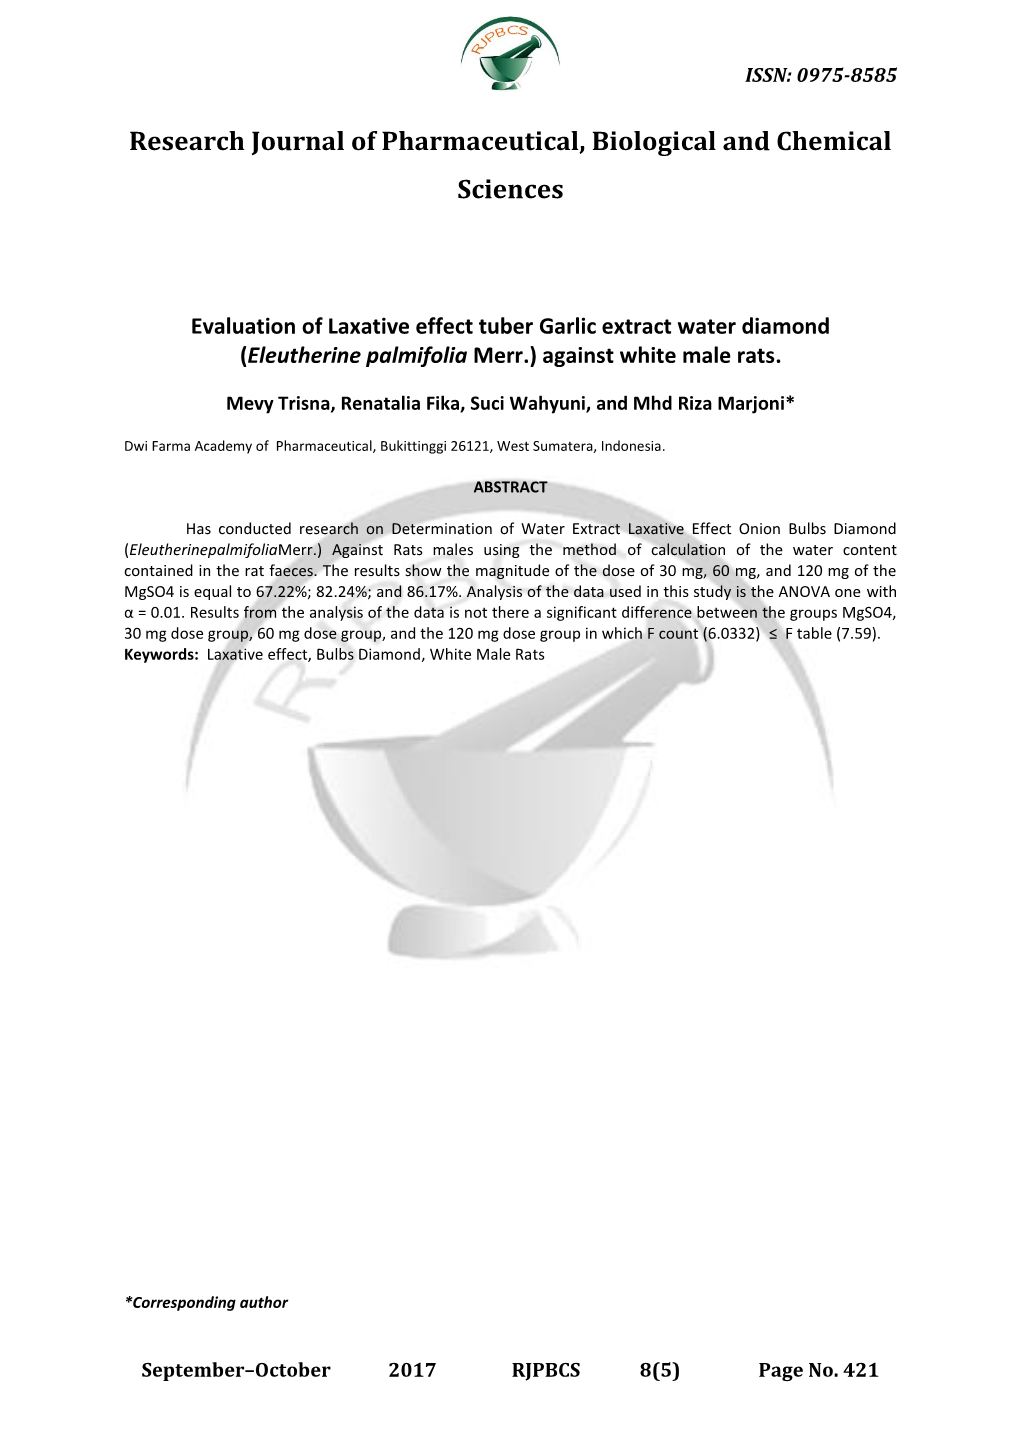 Evaluation of Laxative Effect Tuber Garlic Extract Water Diamond (Eleutherine Palmifolia Merr.) Against White Male Rats